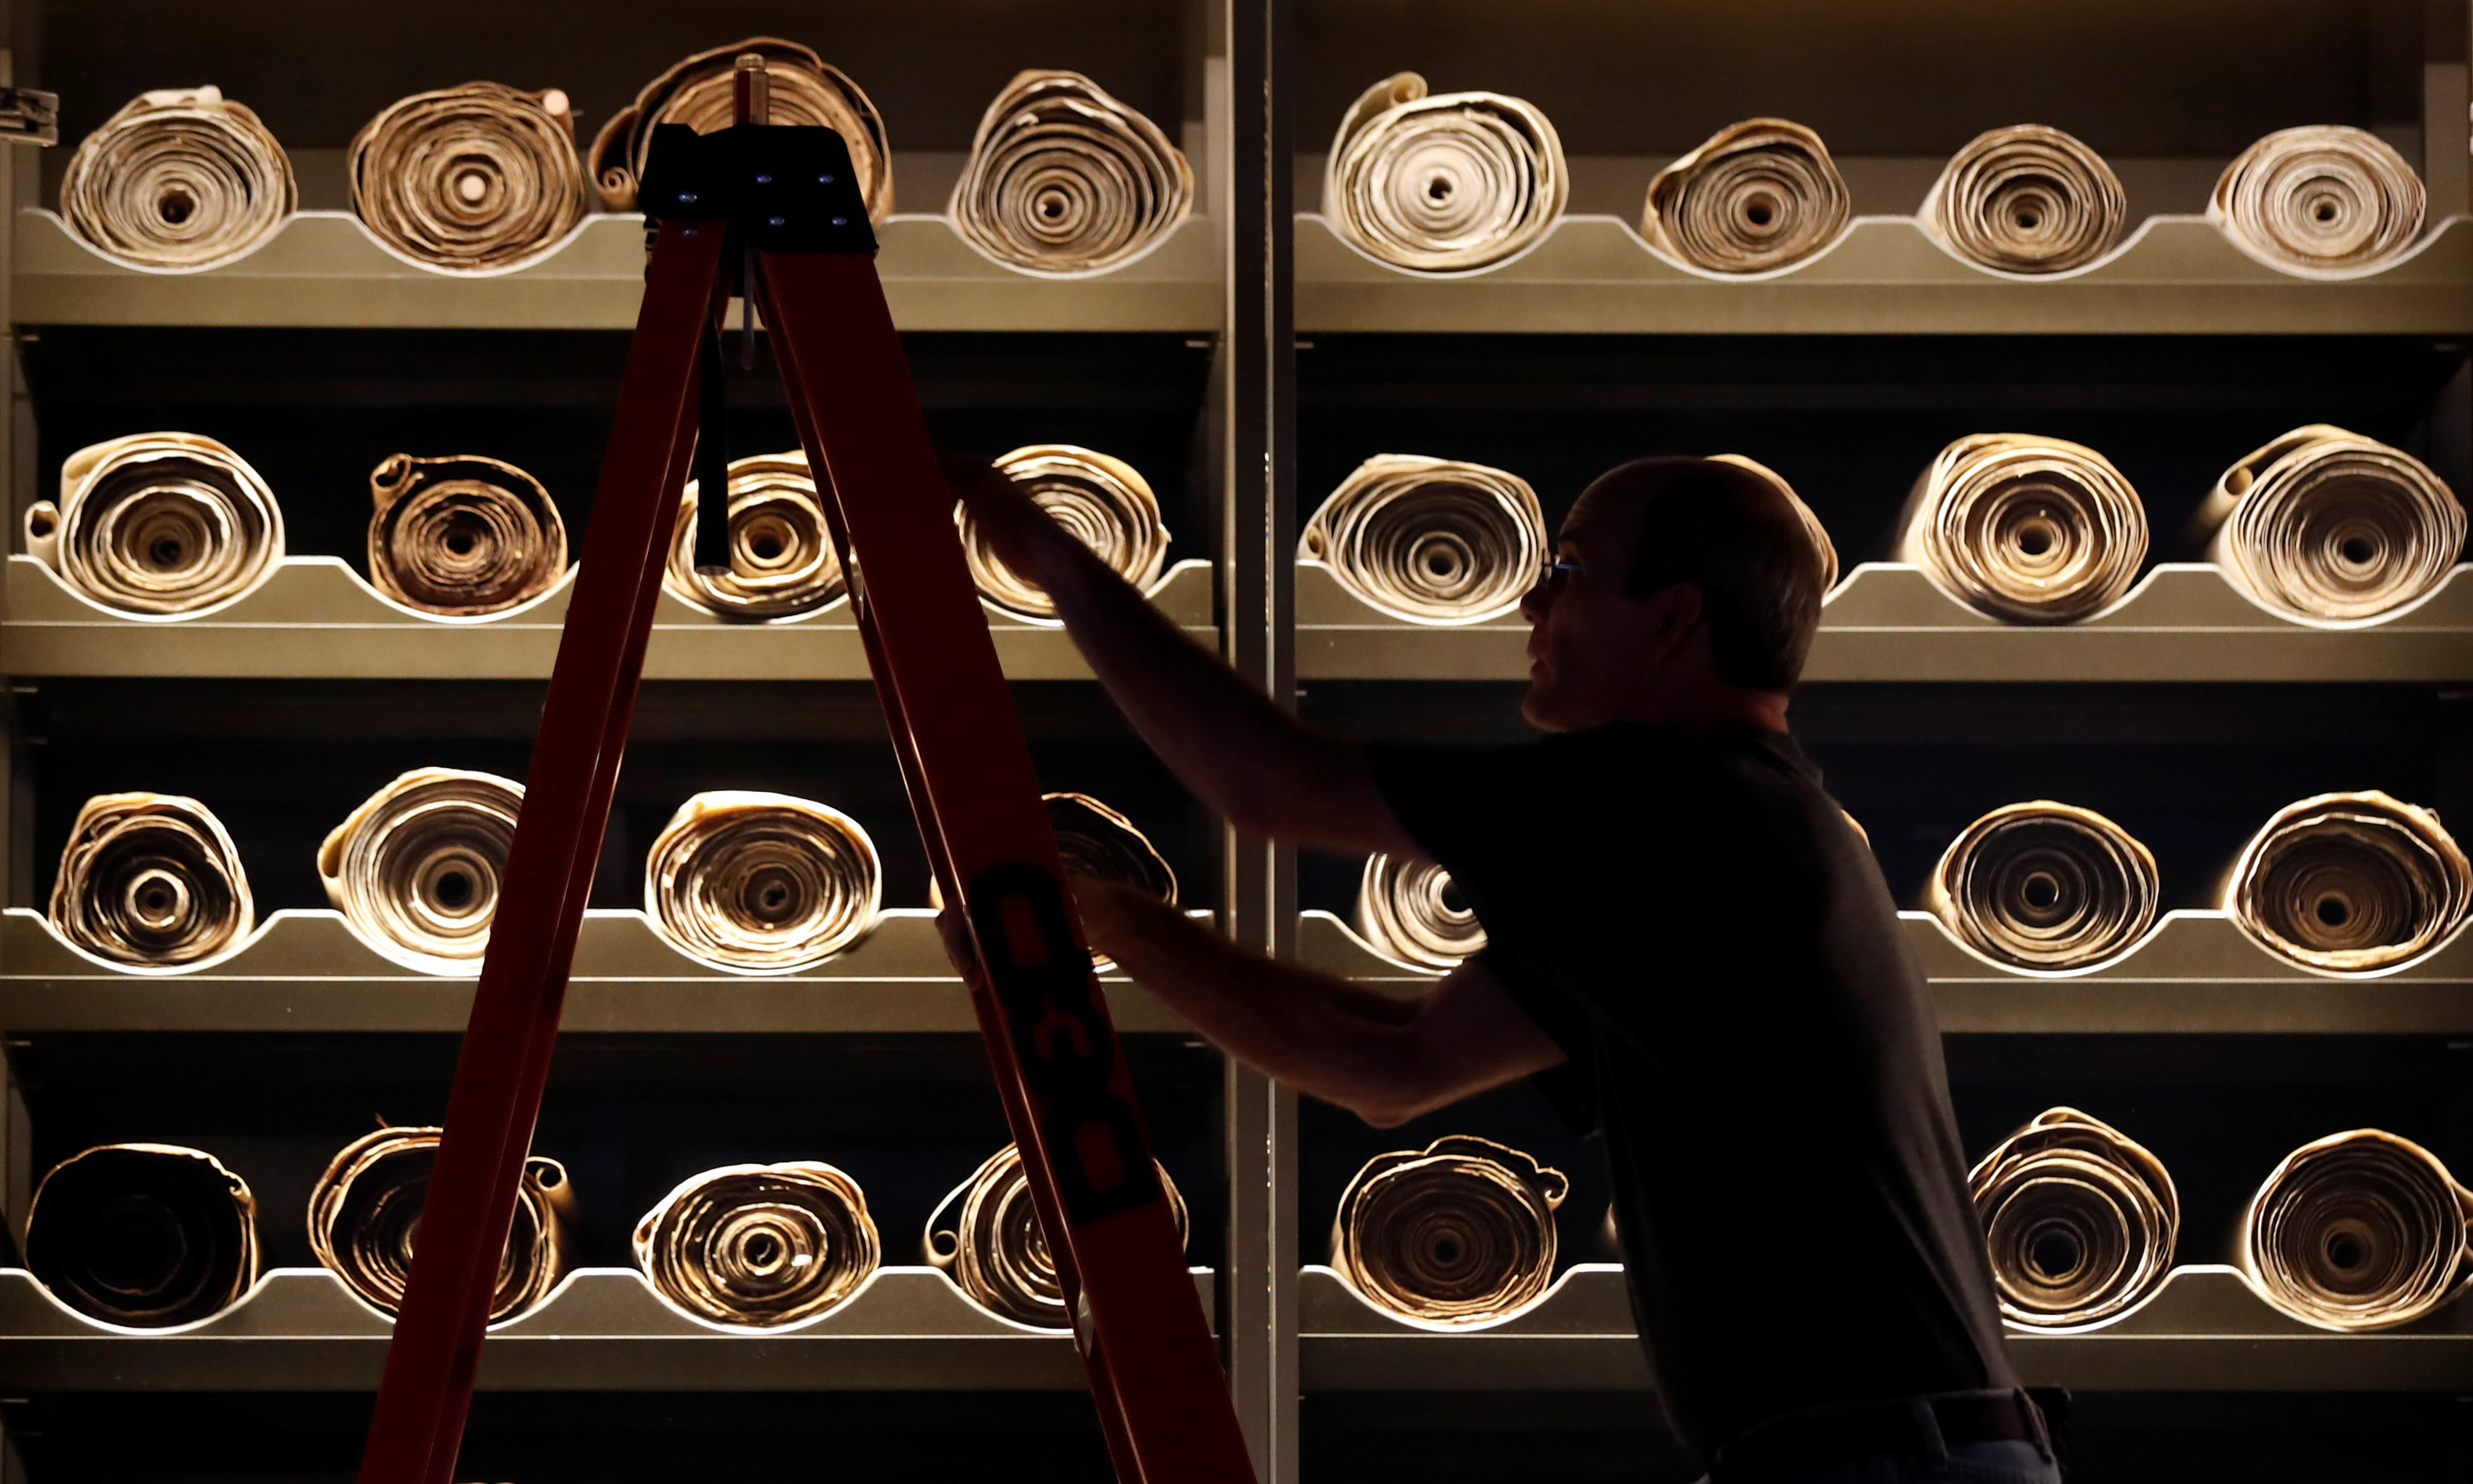 A worker climbs a ladder beside Torah scrolls on display at the Museum of the Bible in Washington, U.S. (Reuters)